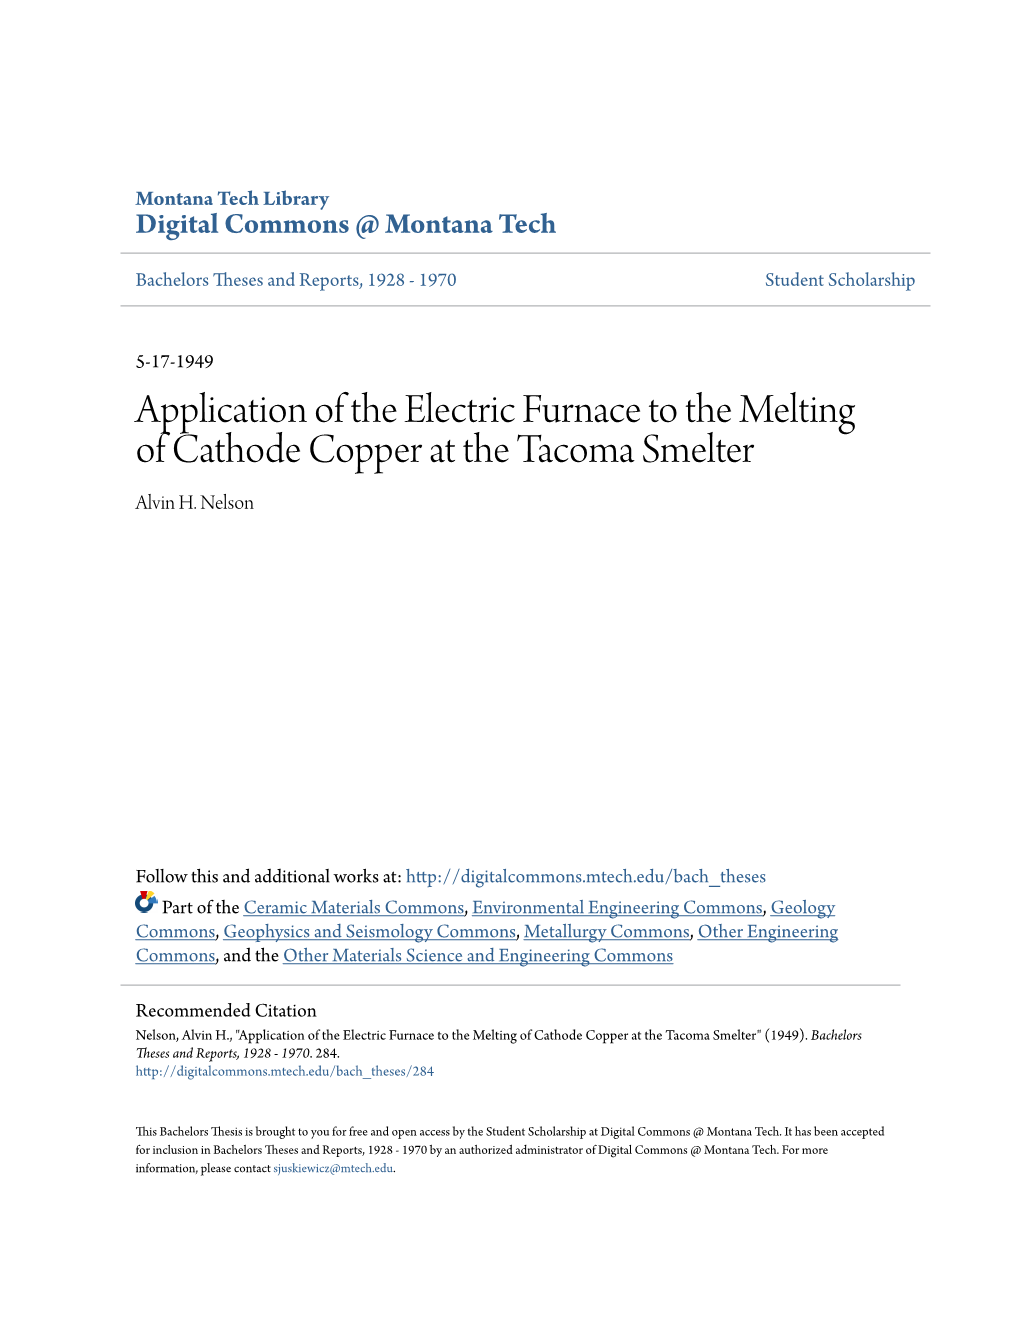 Application of the Electric Furnace to the Melting of Cathode Copper at the Tacoma Smelter Alvin H